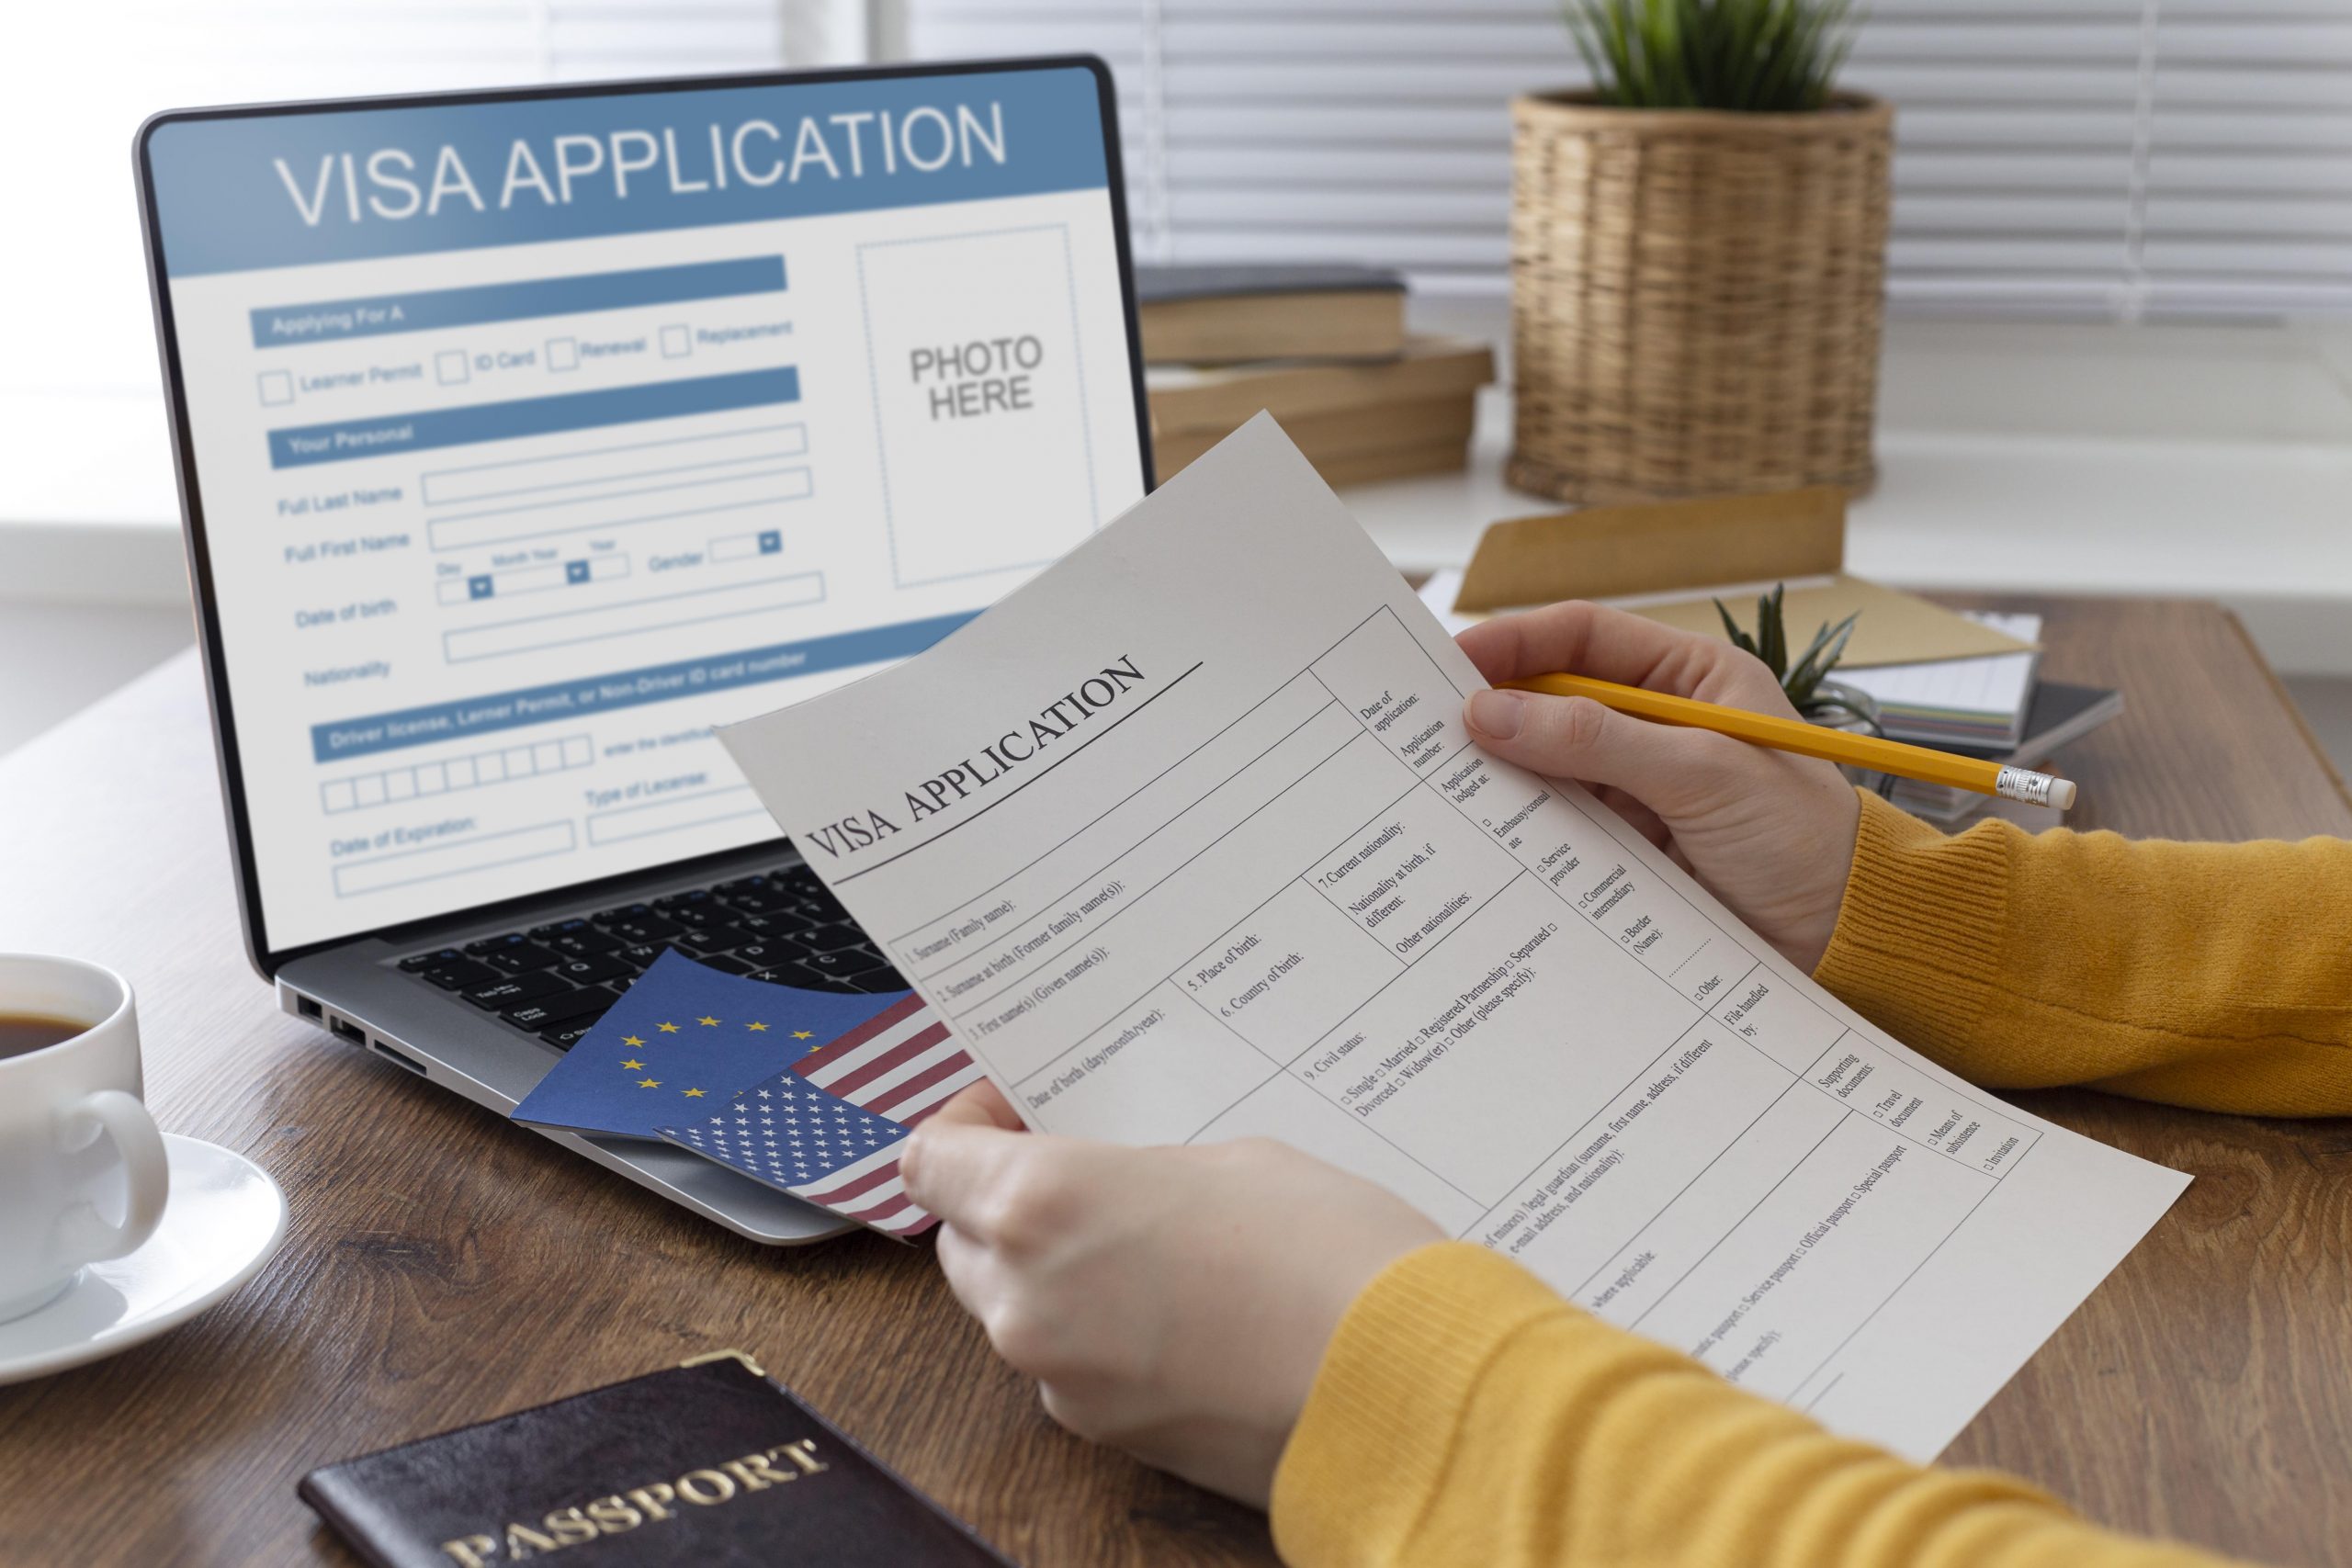 visa-application-composition-with-europe-and-america-flag